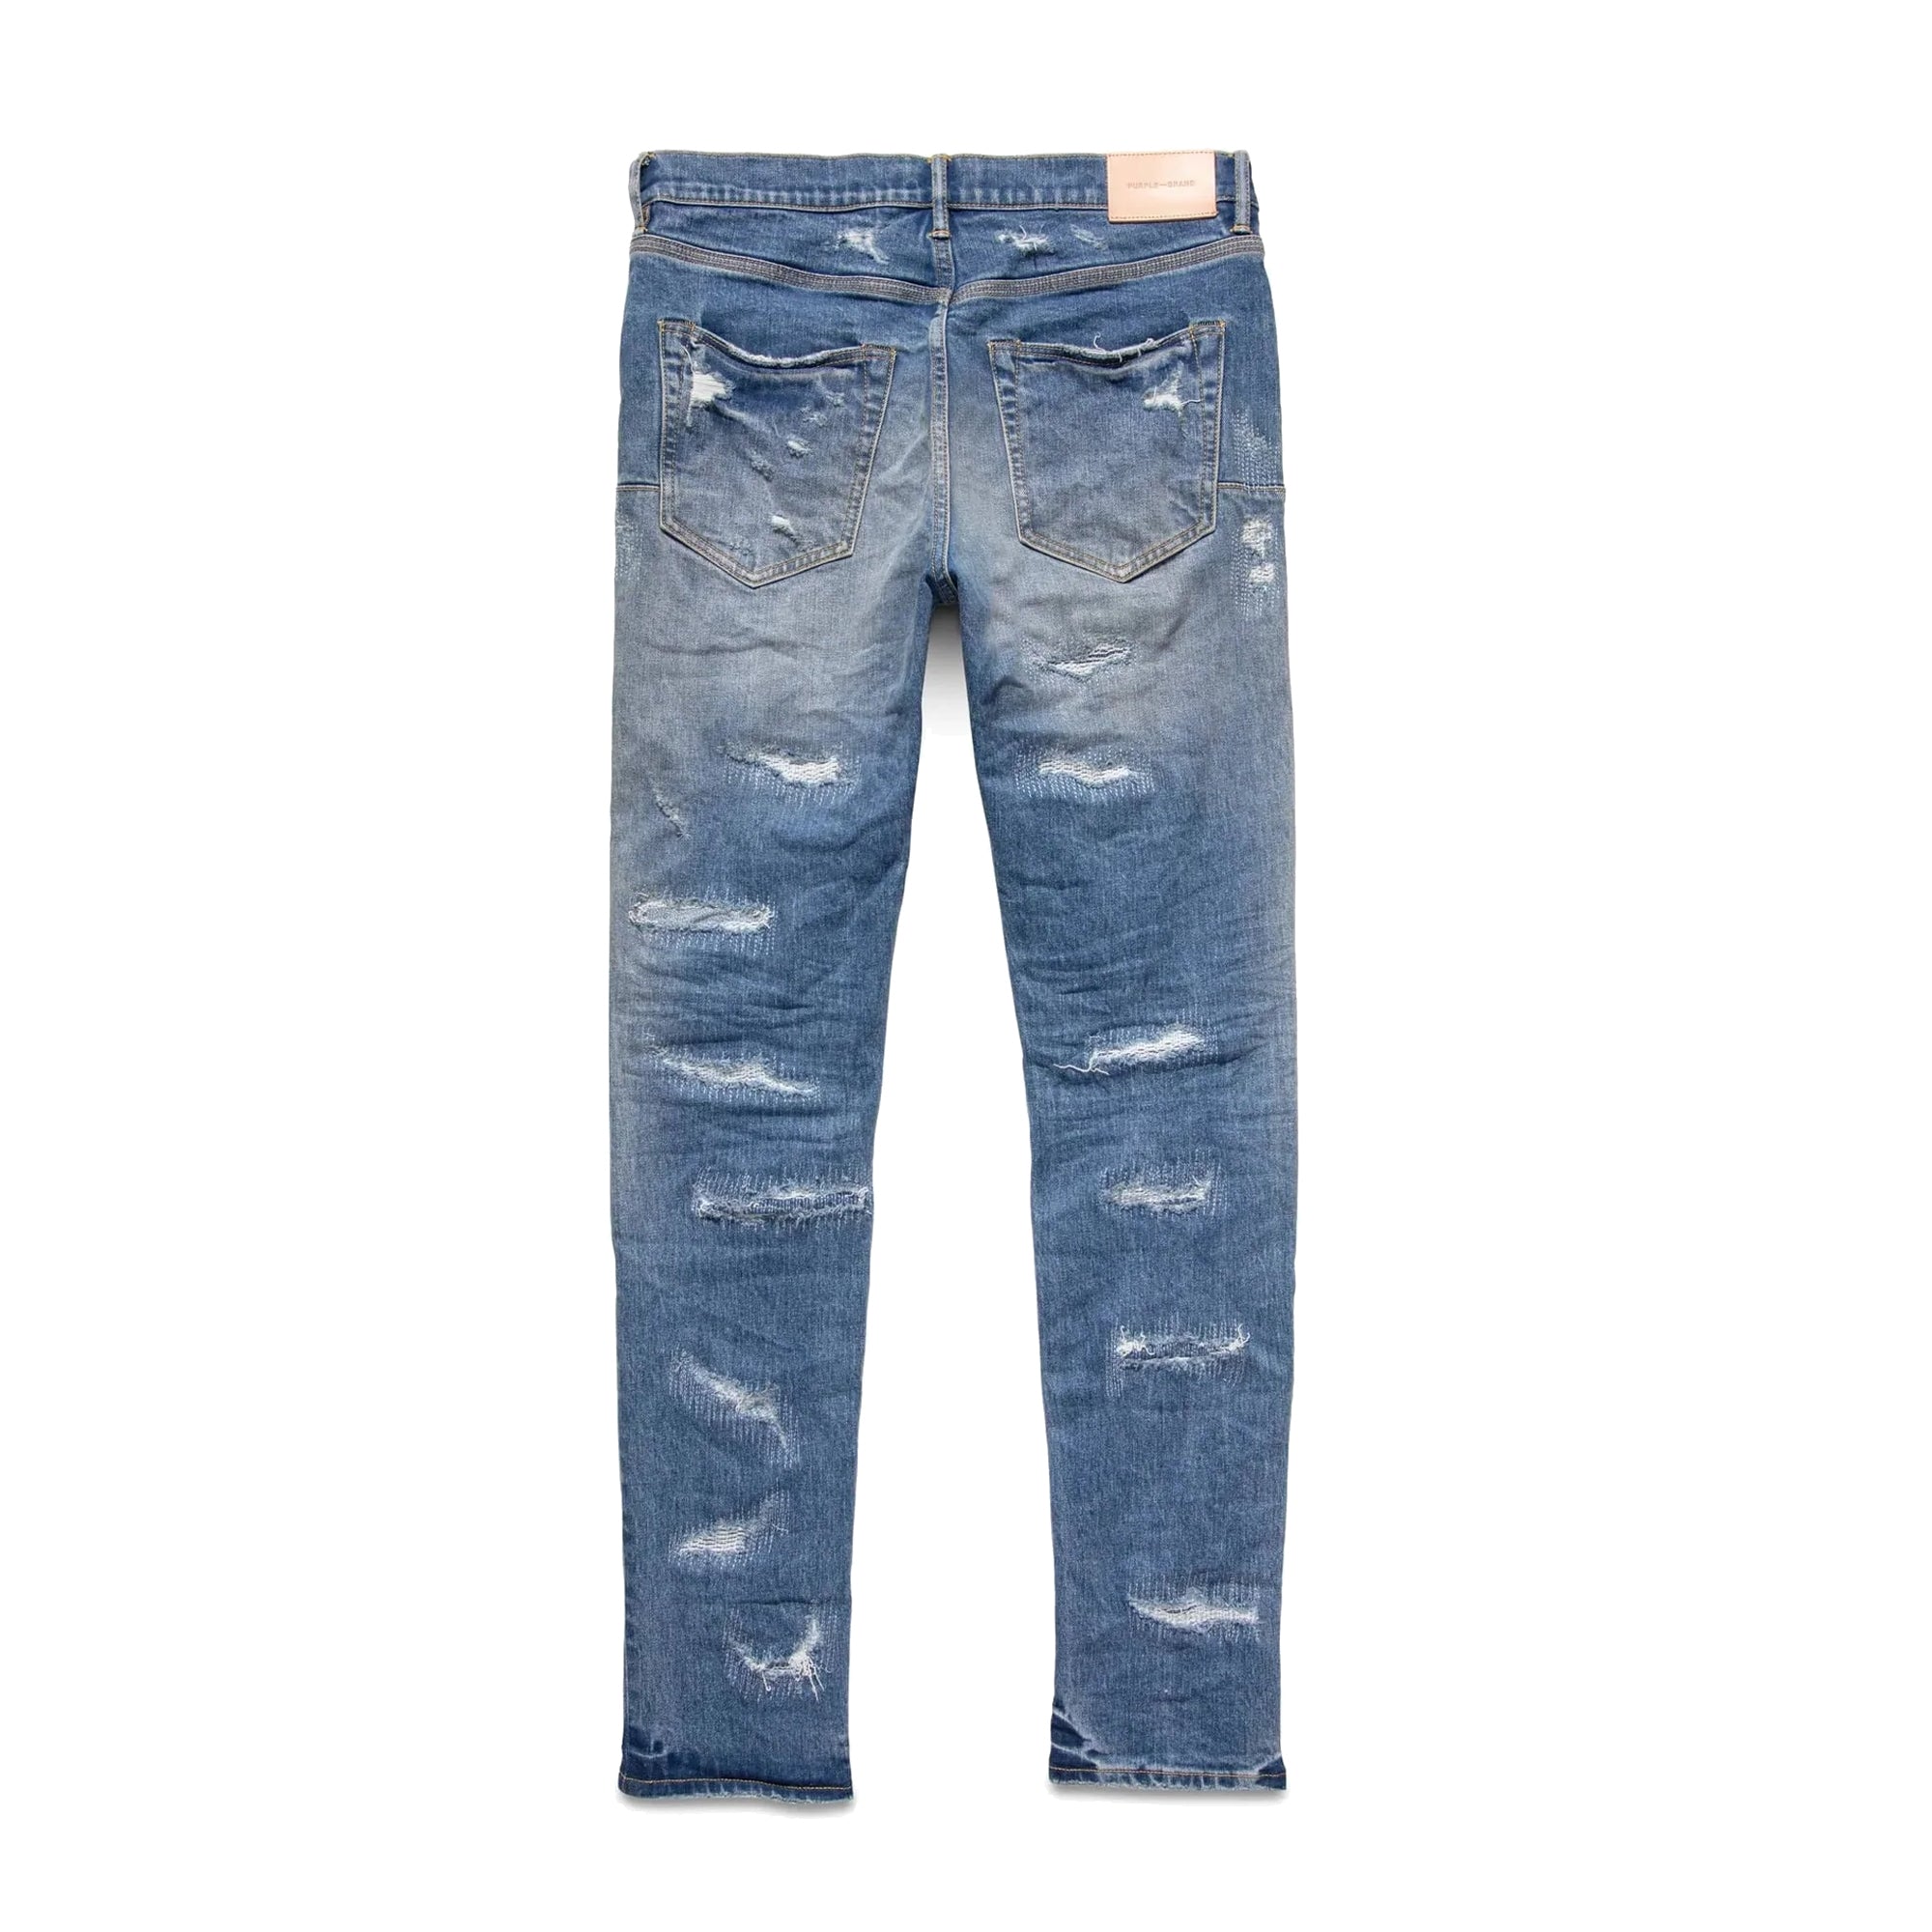 Purple-Brand Jeans - Faded Distressed and Ripped - Light Indigo